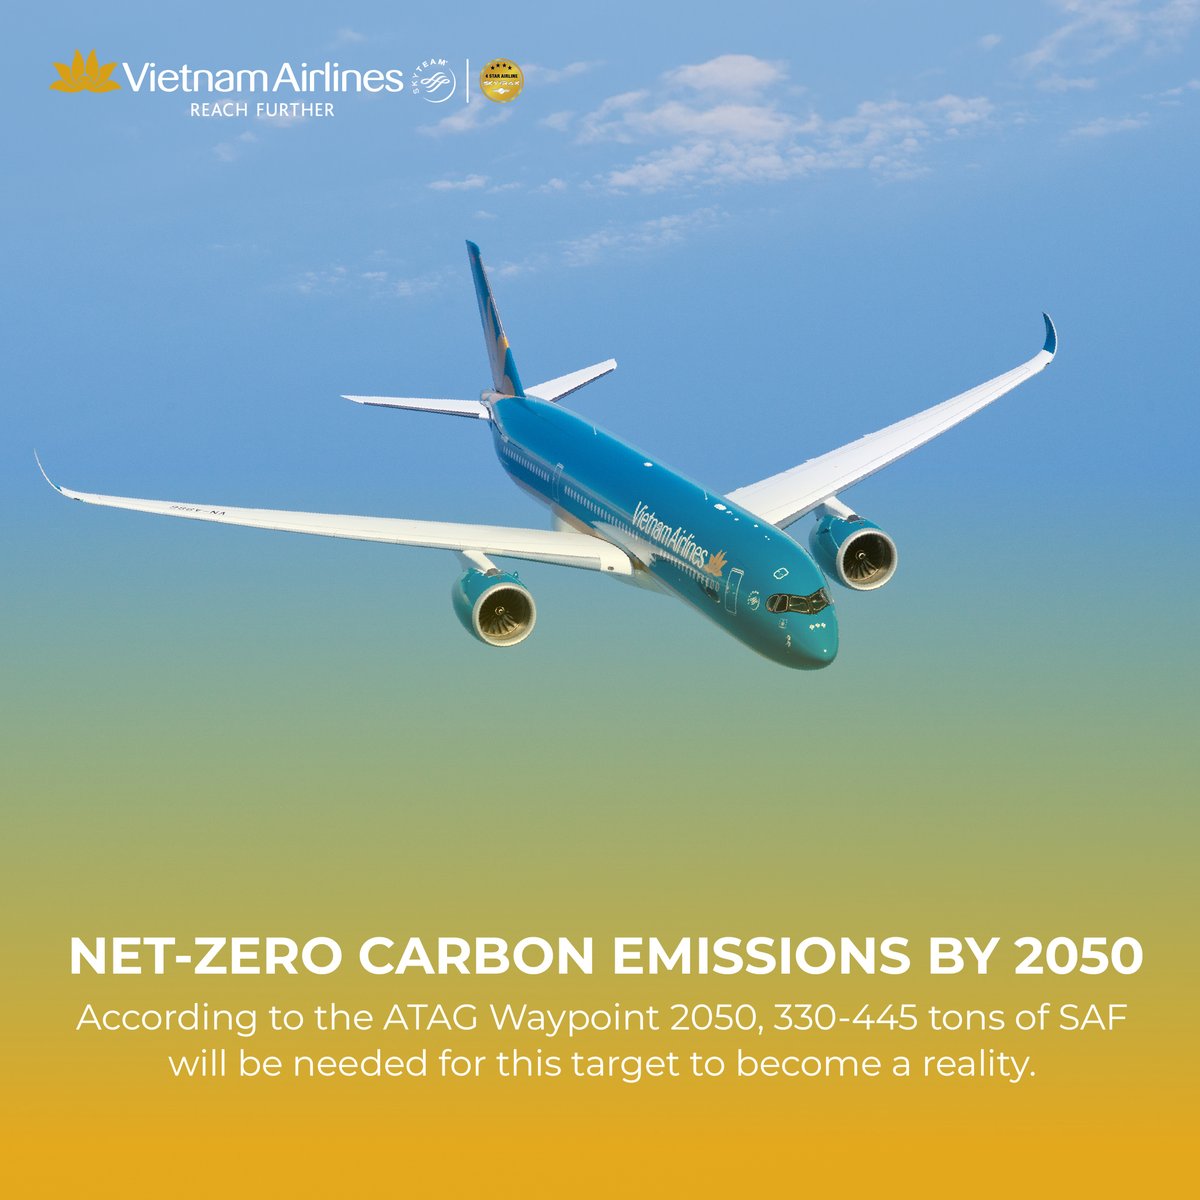 ✈ The global aviation industry is striving towards the goal of achieving Net-Zero Carbon emissions by 2050. 🌎 To make this goal a reality, approximately 330-445 tons of Sustainable Aviation Fuel (SAF) will be needed. #VietnamAirlines